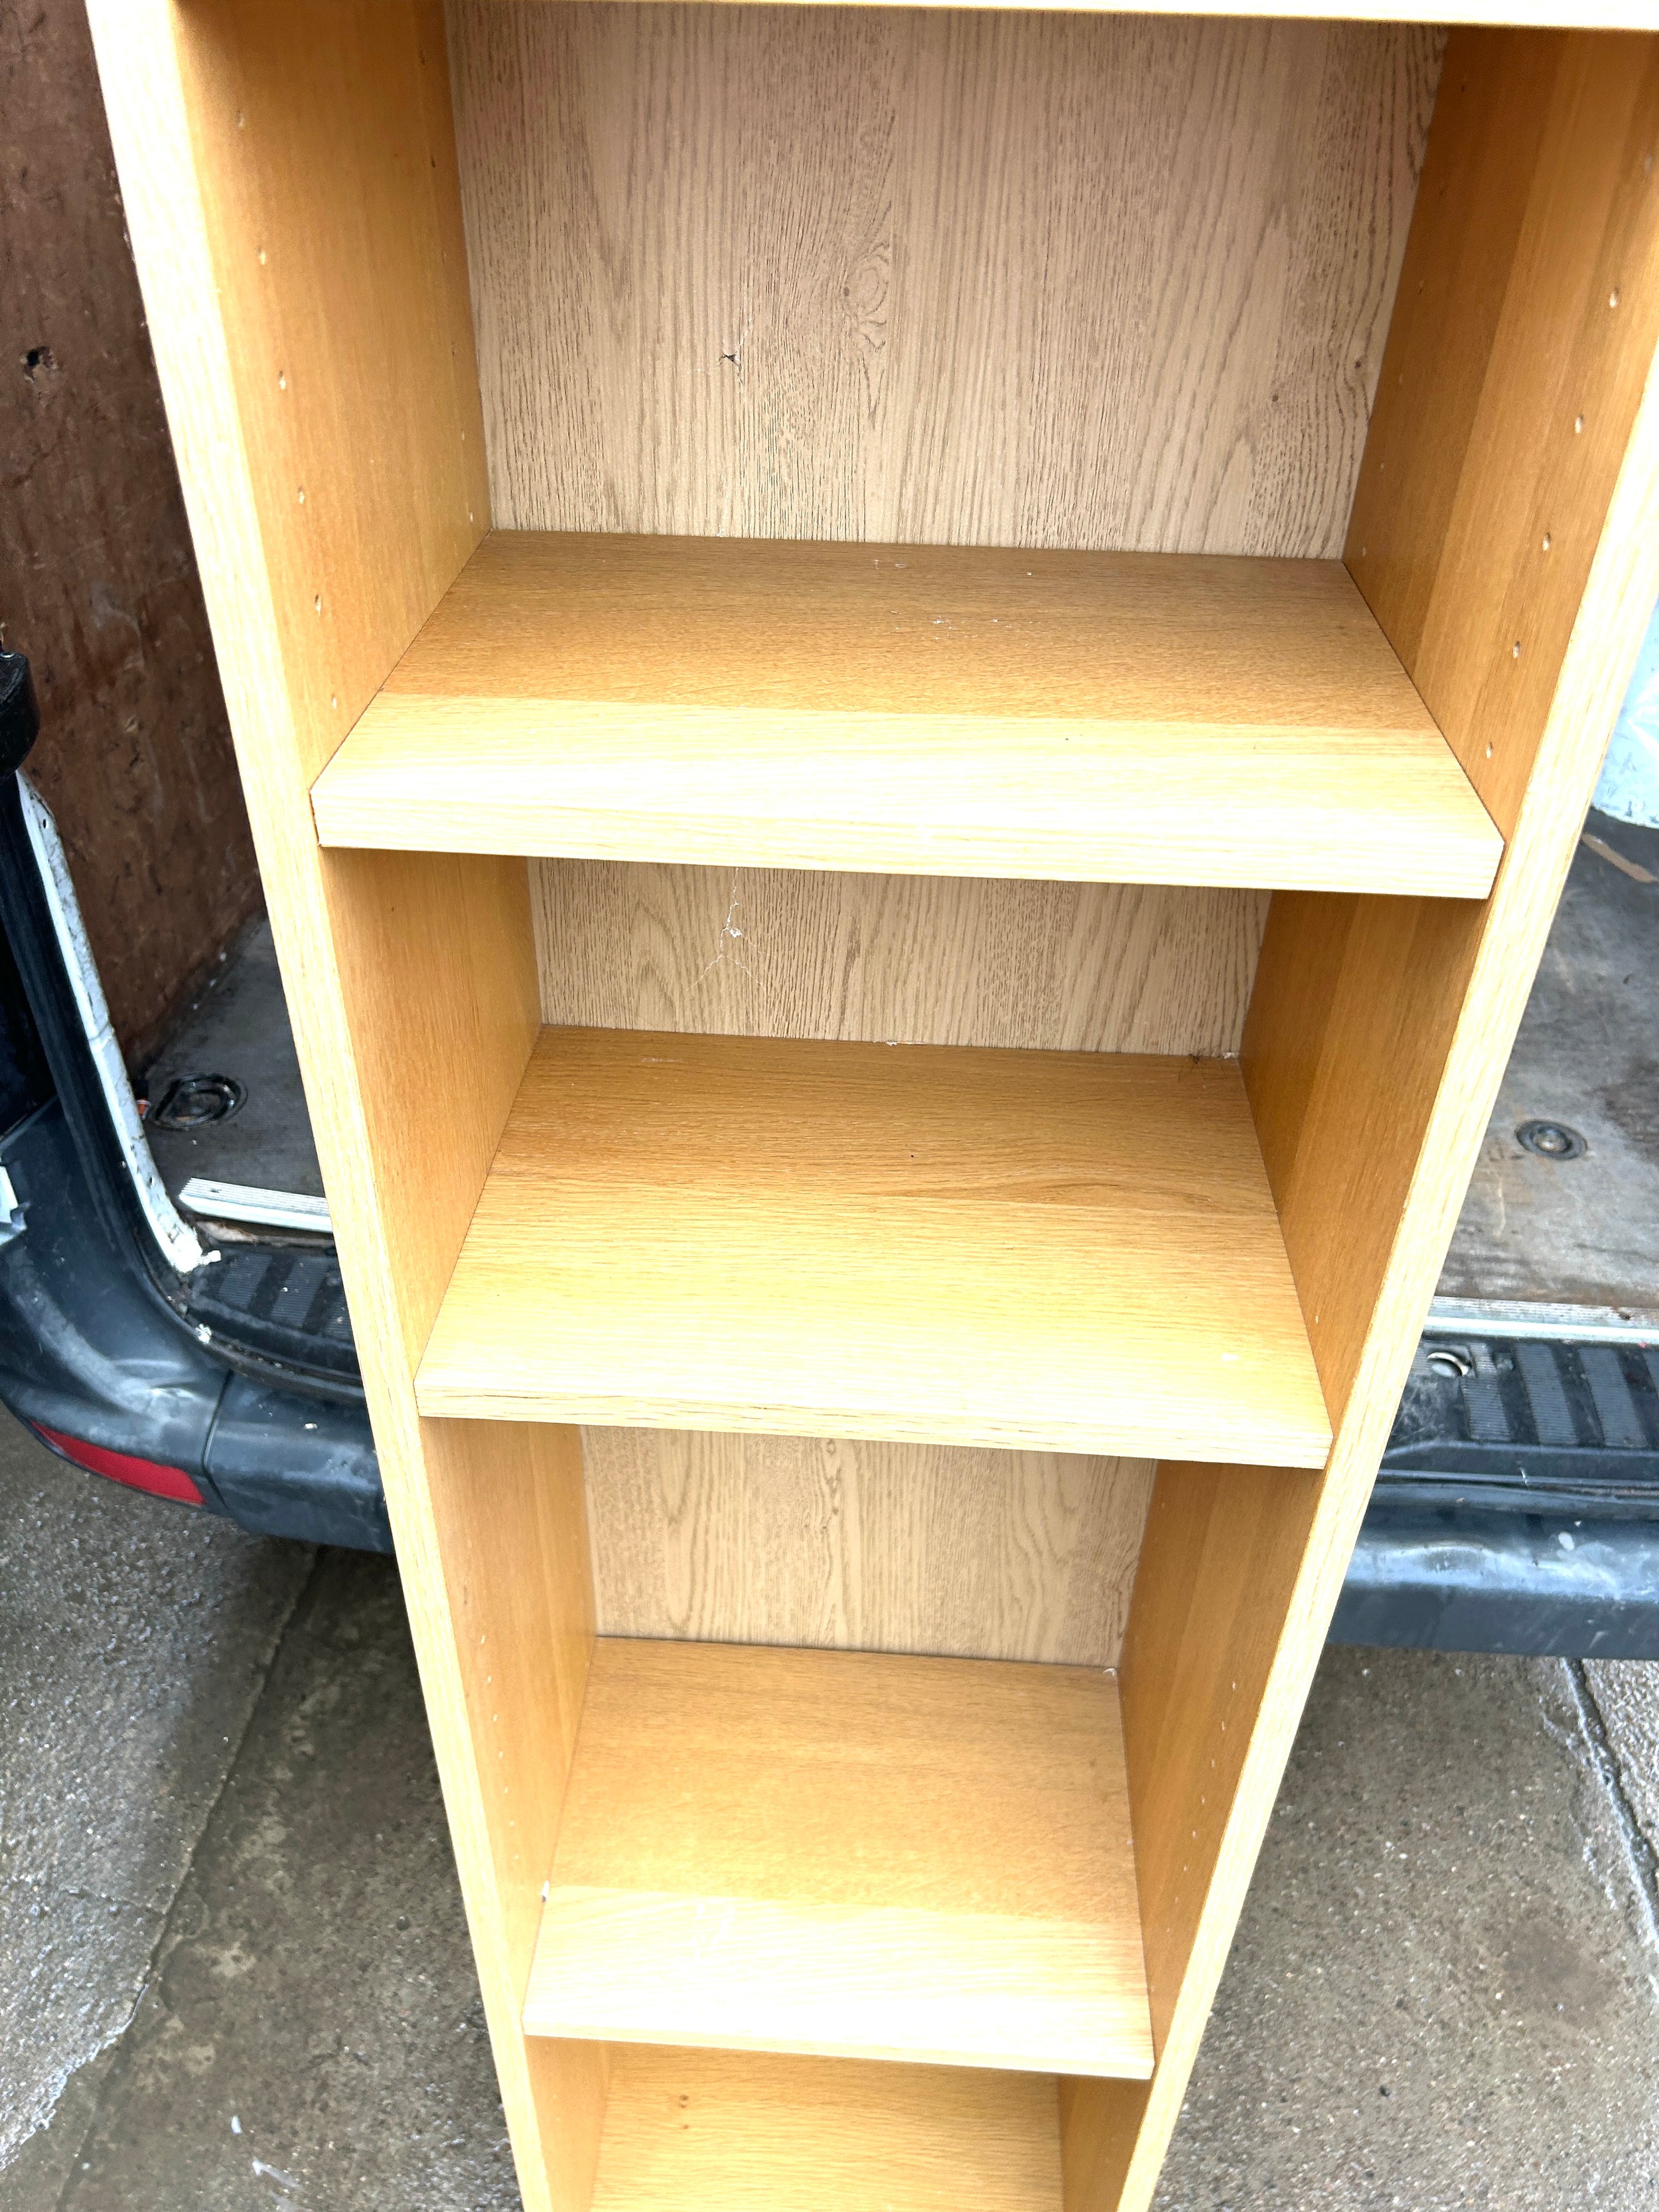 6 shelf oak bookcase measures approximately 80 inches by 11 inches - Image 2 of 2